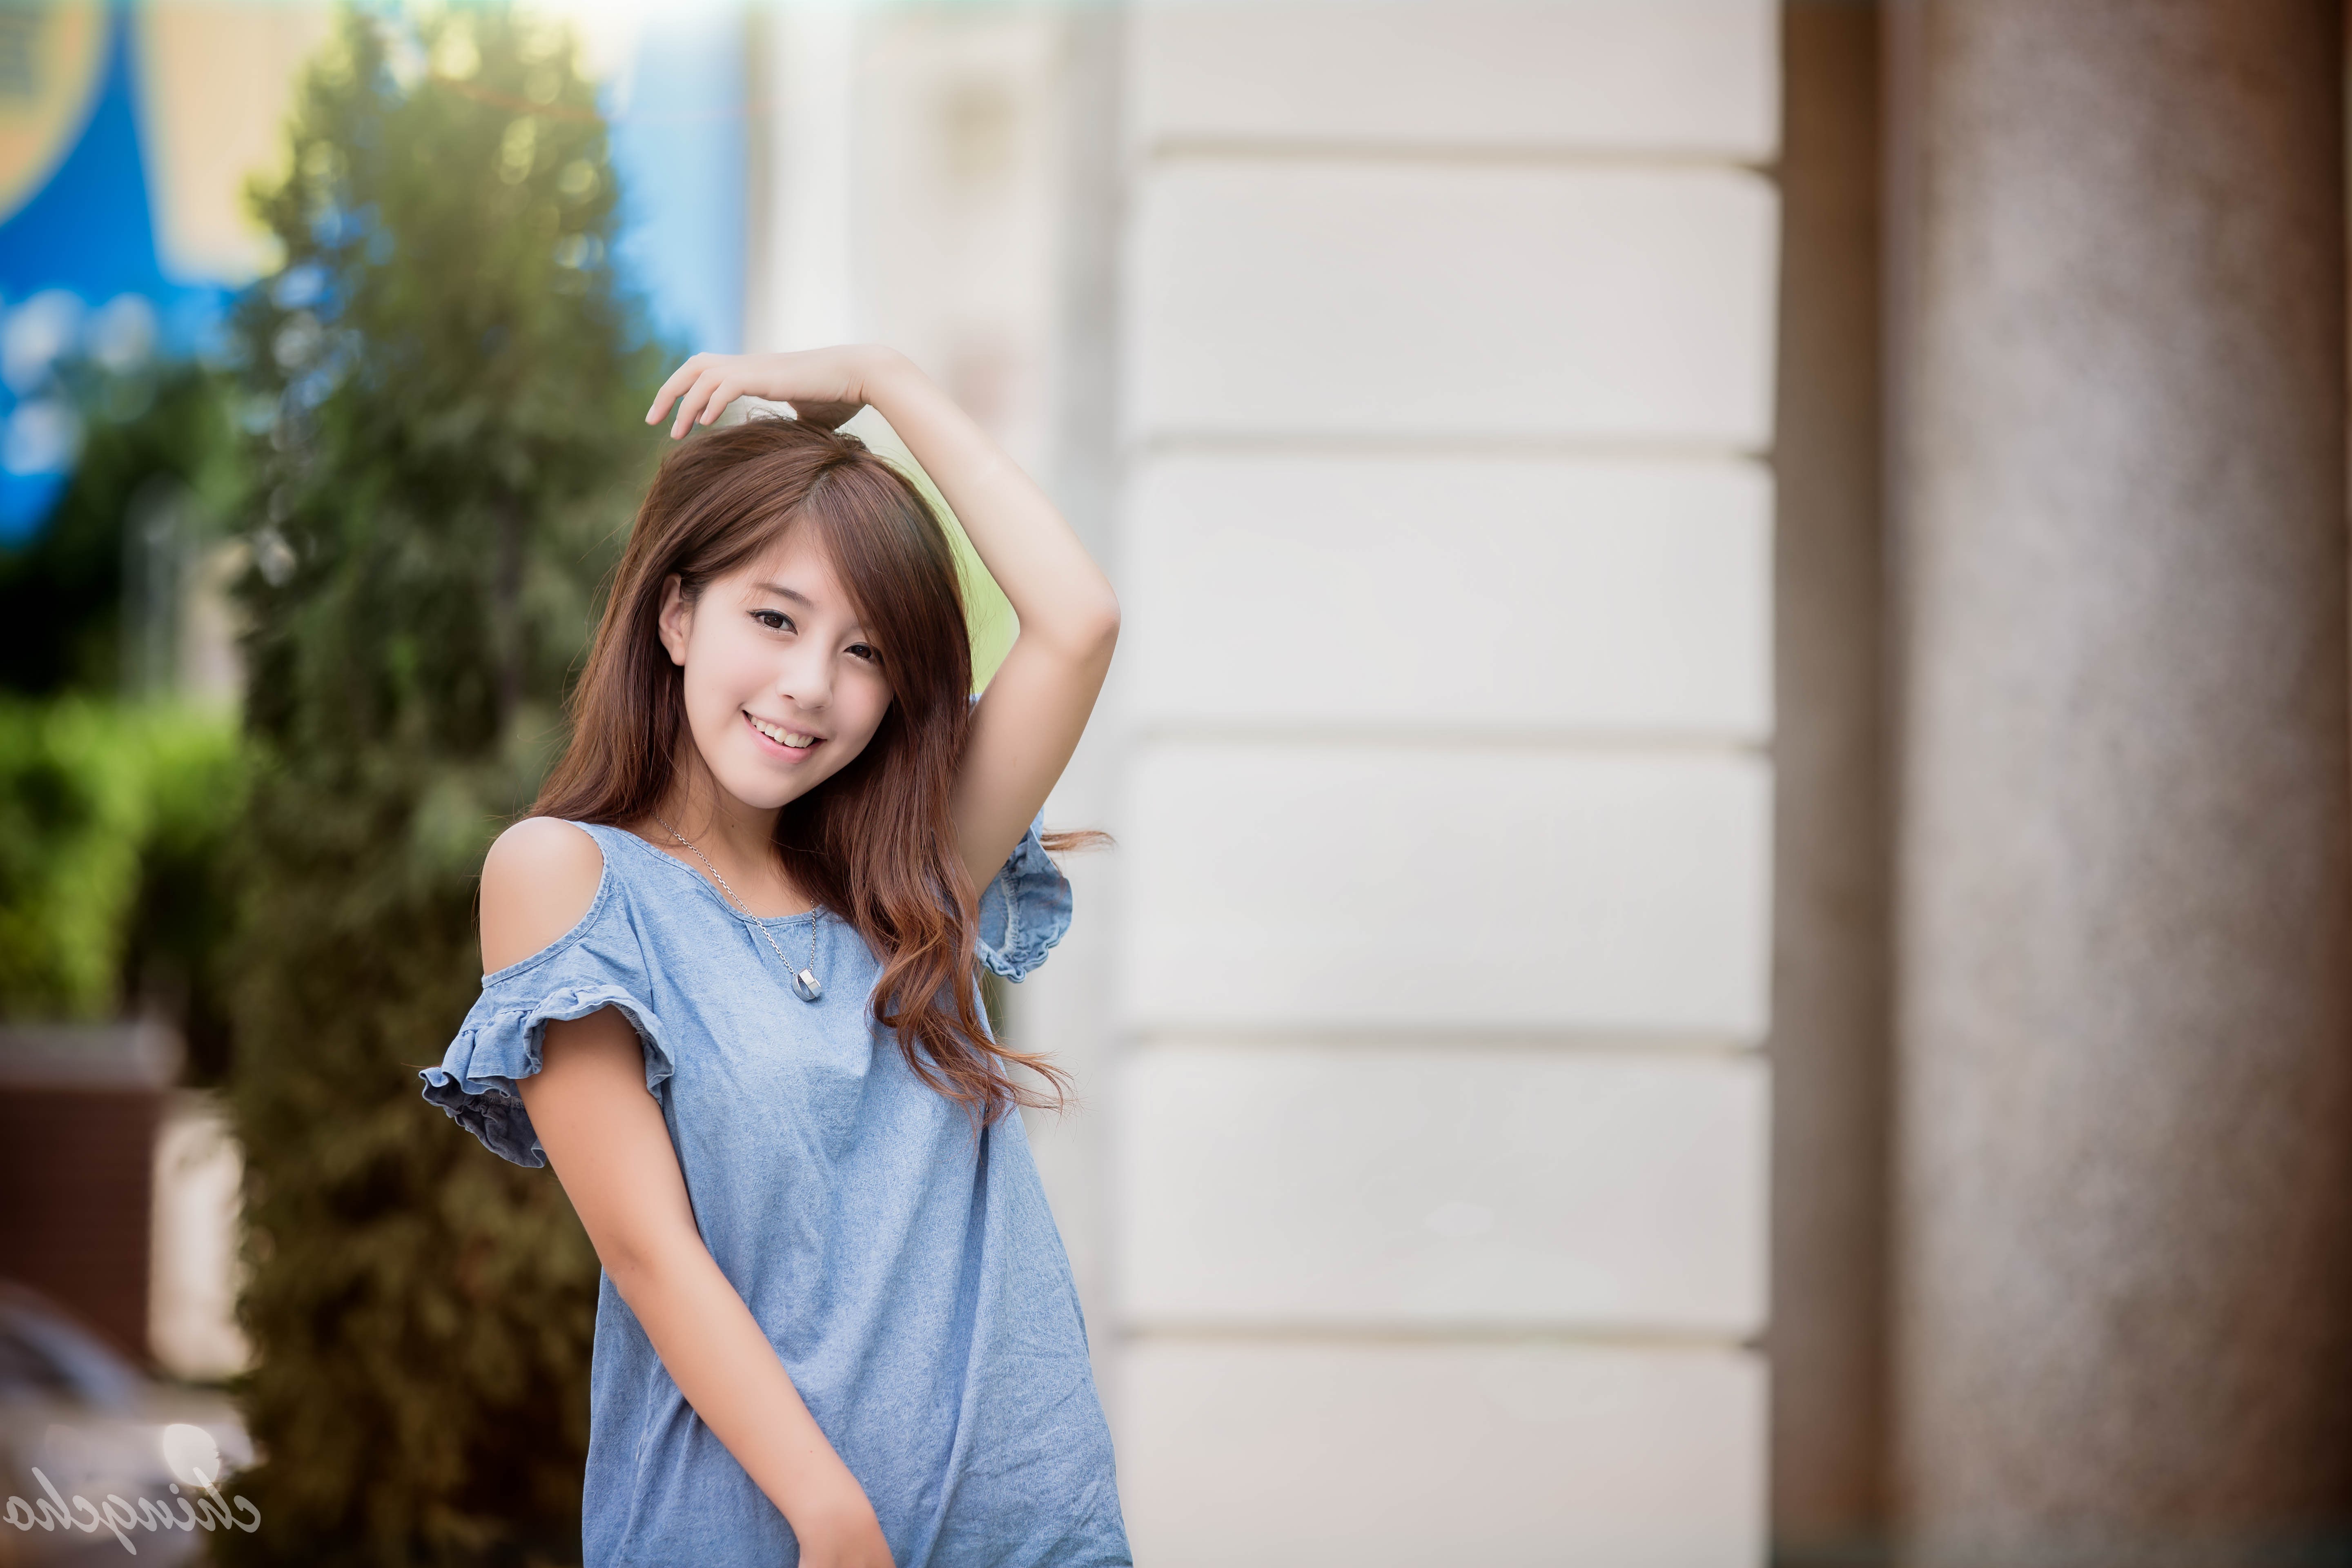 Becky (Taiwanese Model) Wallpapers